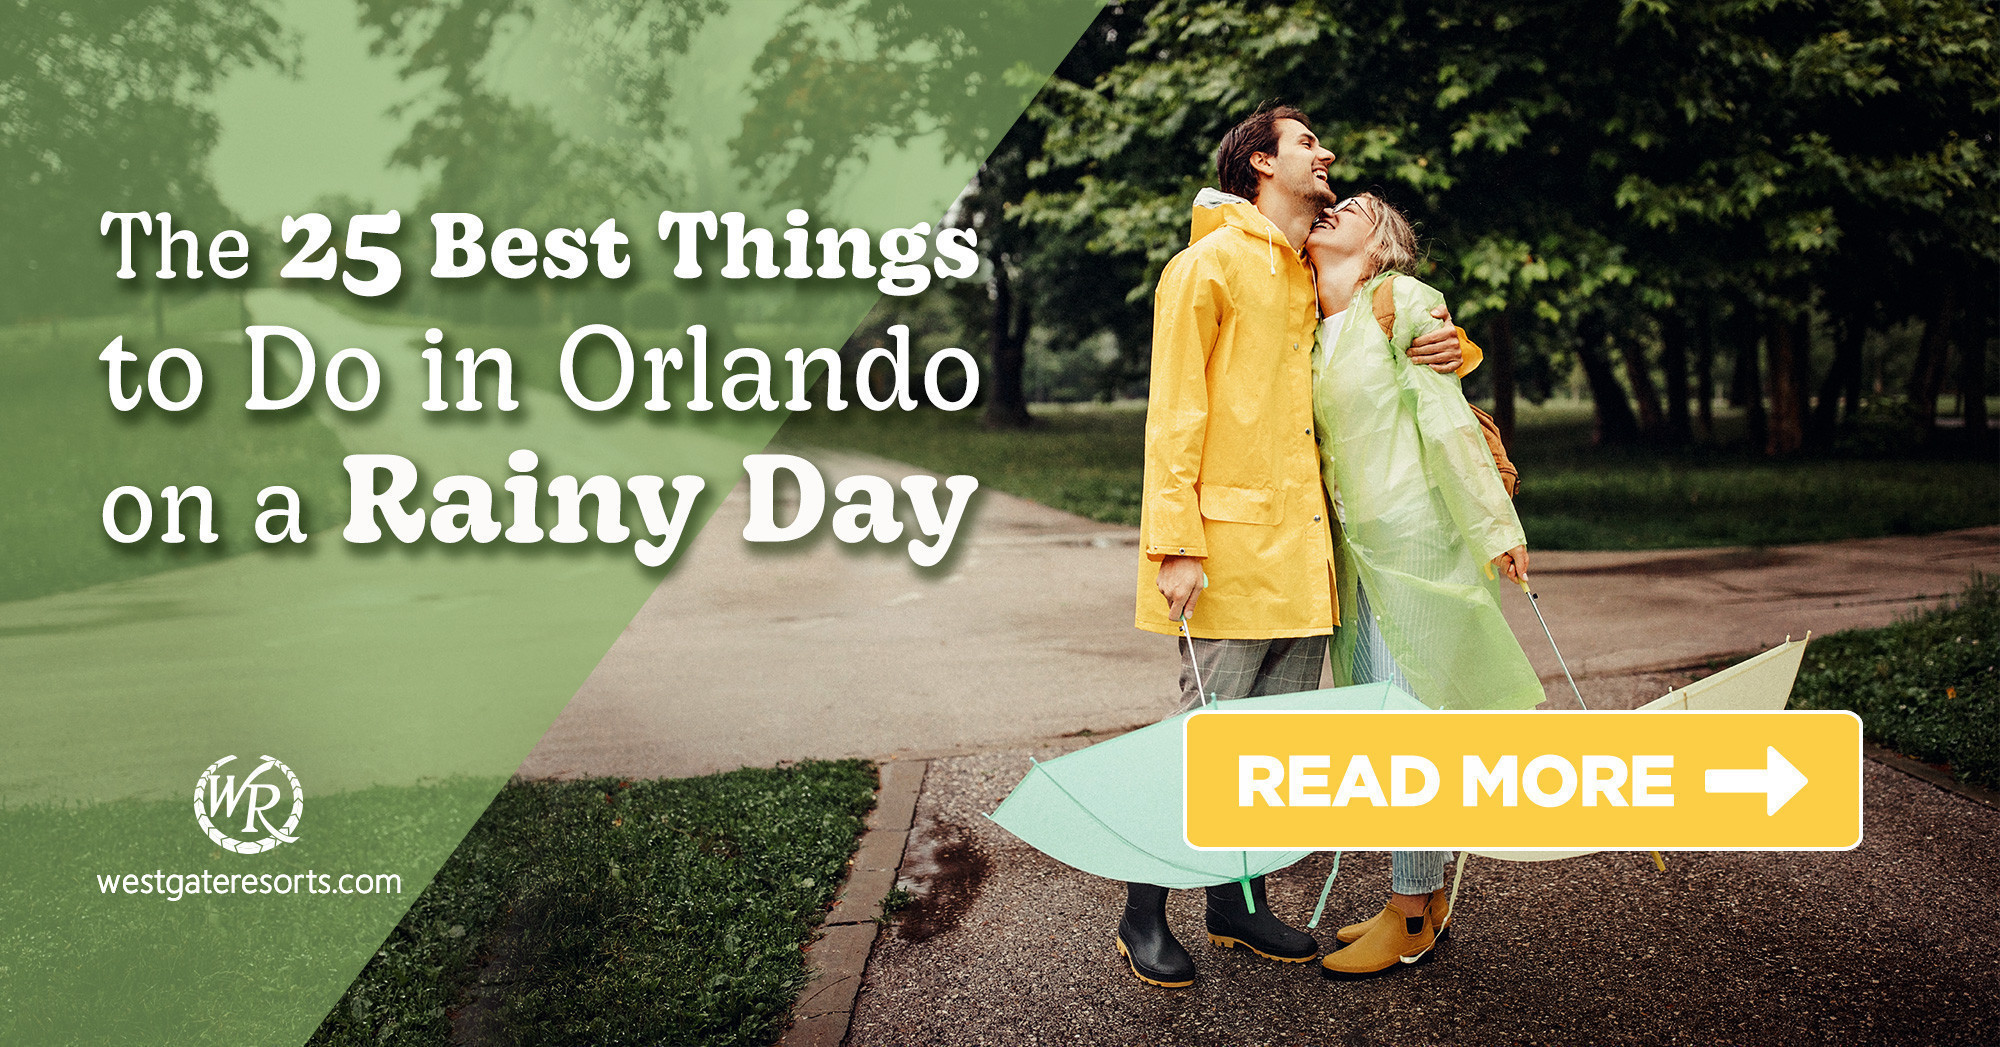 The 25 Best Things to Do in Orlando on a Rainy Day When It Pours on Your Vacay